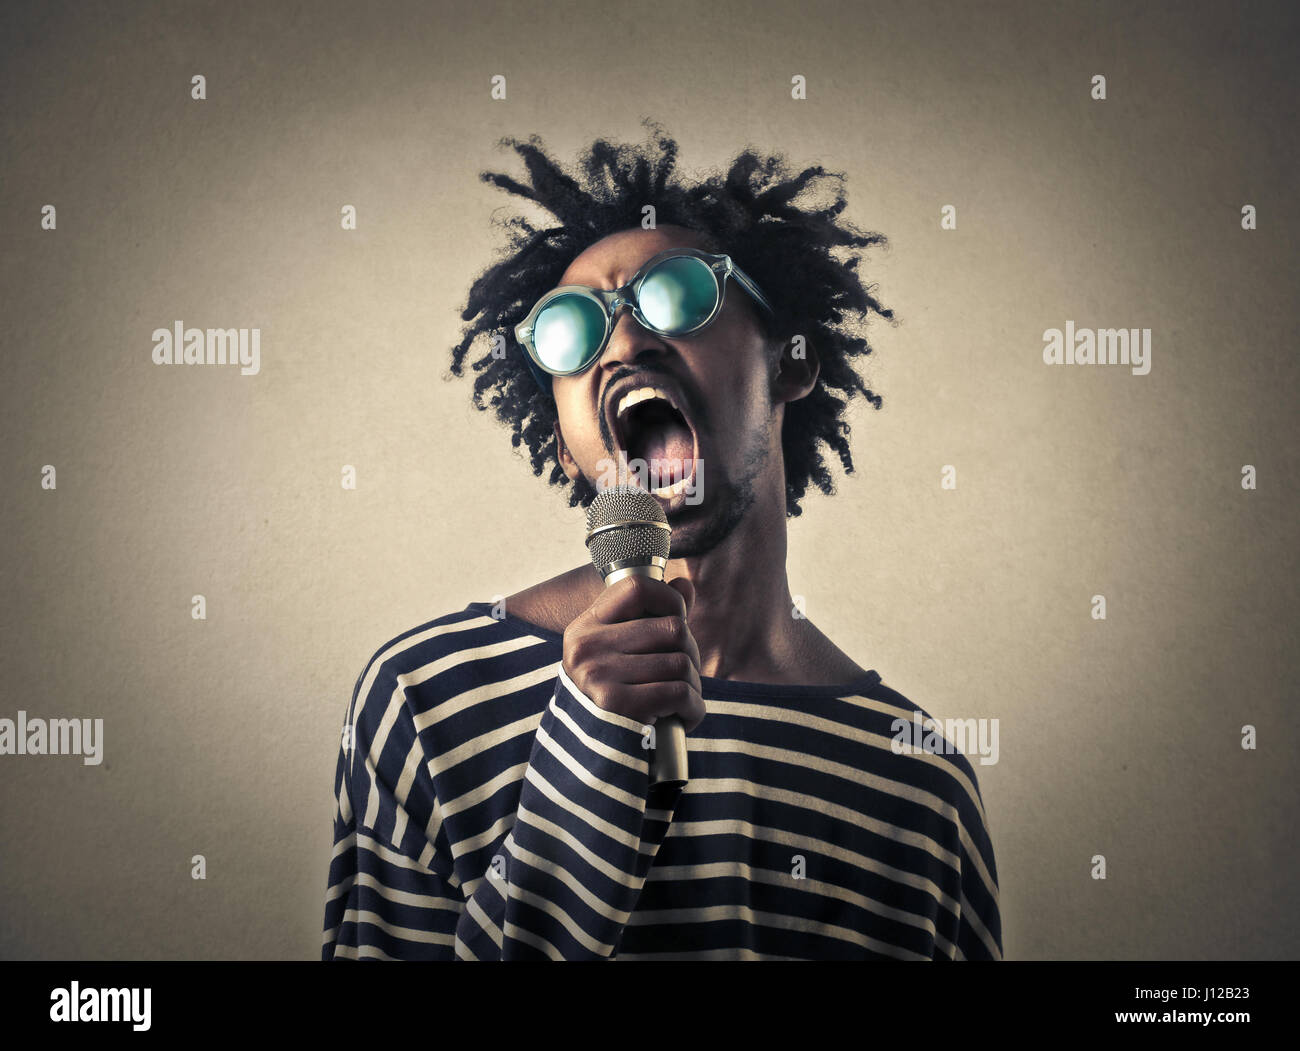 young black man singing in microphone Stock Photo